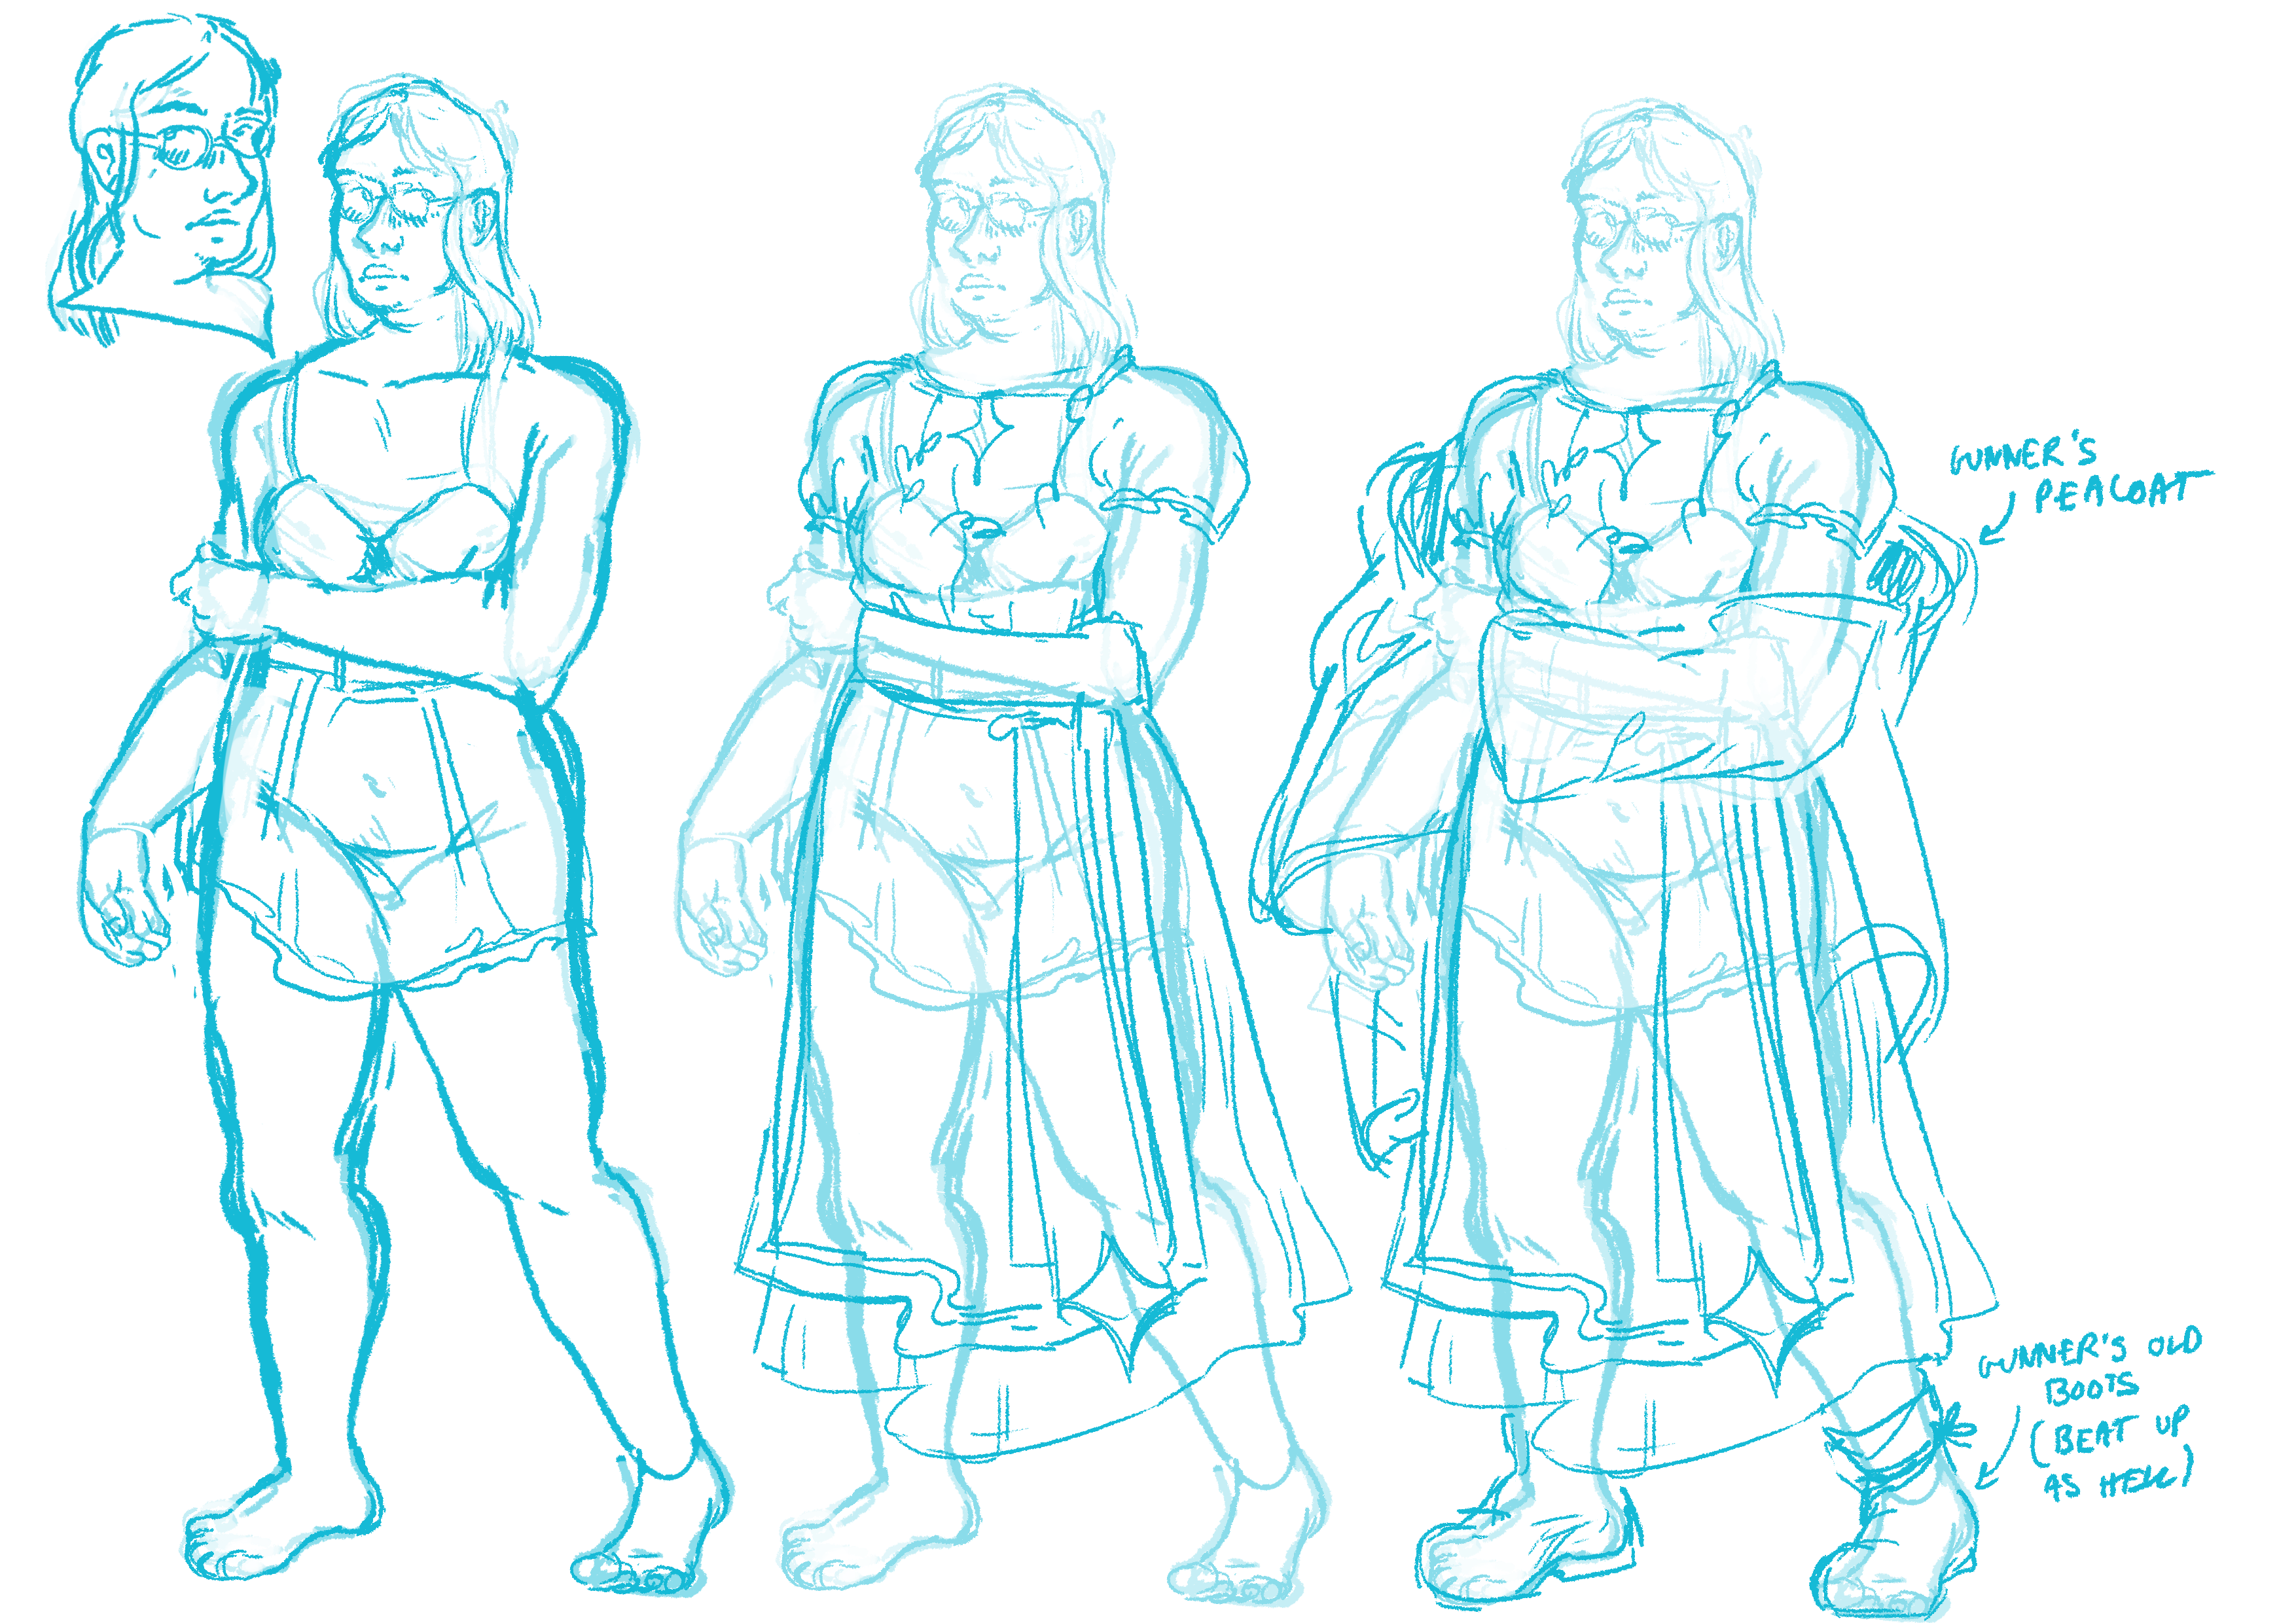 Three sketches of Euterpe, a young White woman with mousy brown hair and glasses in various states of dress, made to resemble a character model sheet. In the first sketch, she's wearing old-fashioned underwear, and has a chubby body with a long torso and round face. In the second sketch, she's in Eastern European-inspired folk clothing, and the third is the same, except with a large coat over the top.